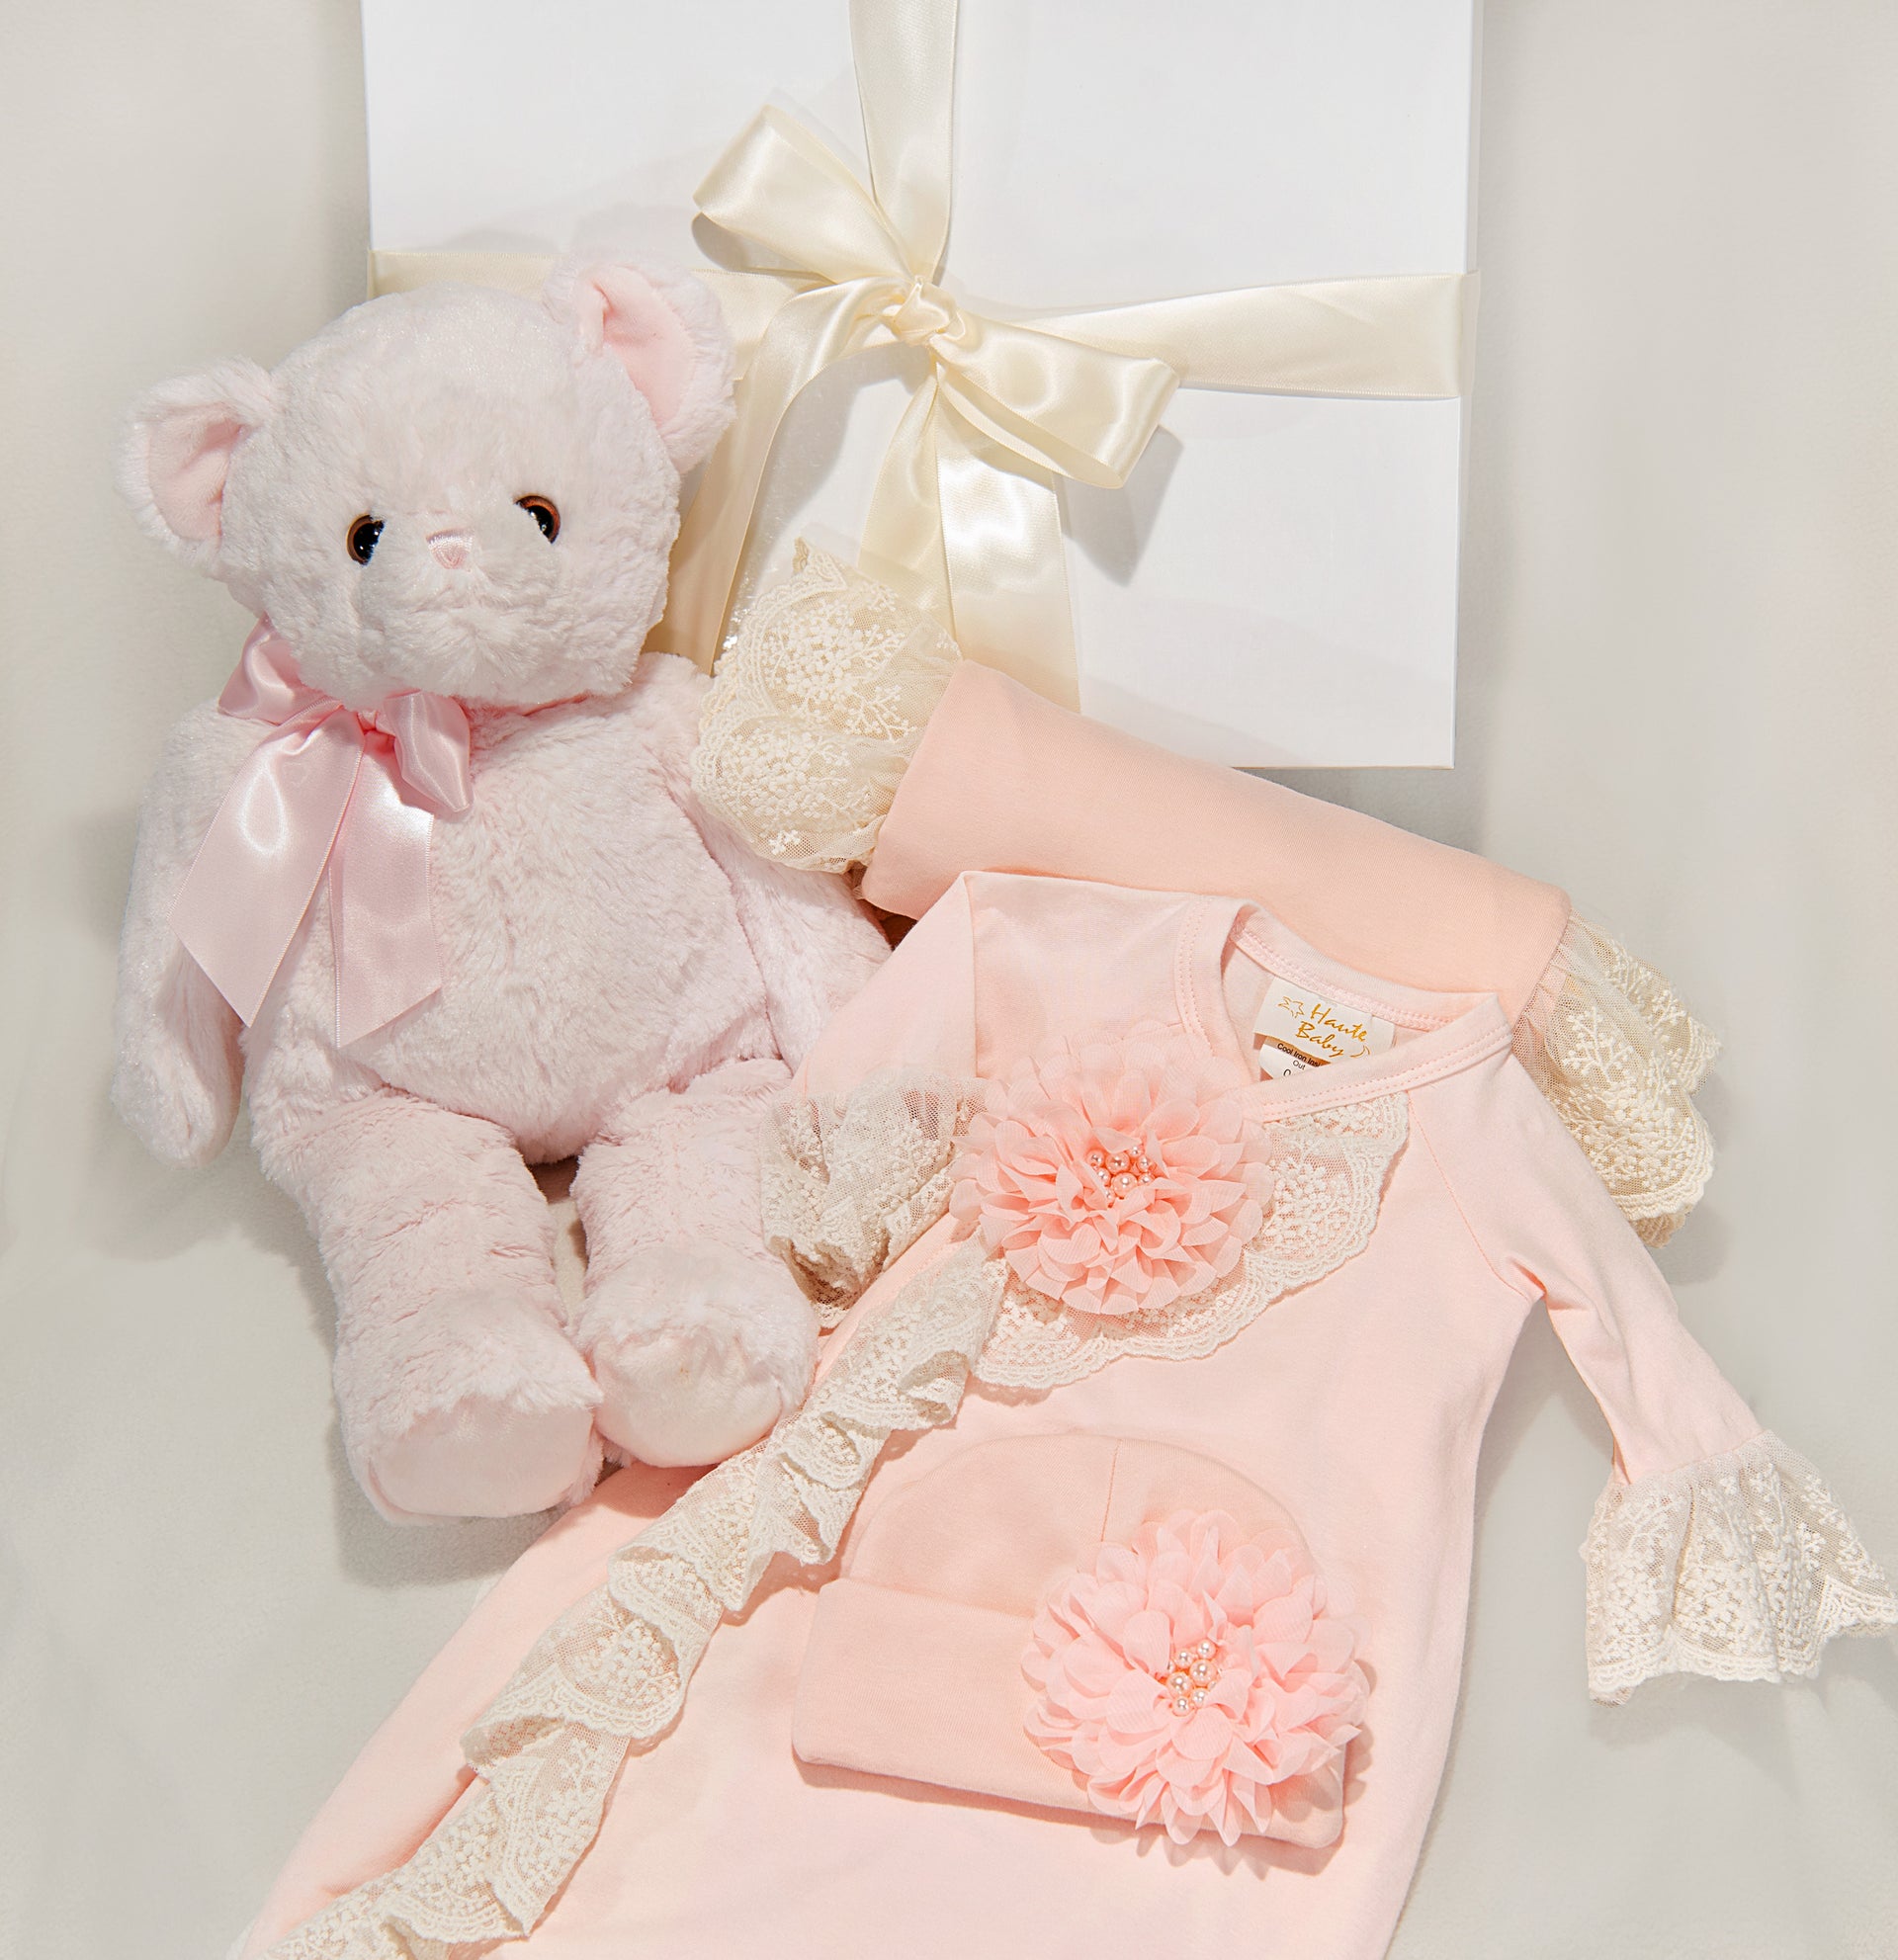 Chic Petite Gown Gift Set